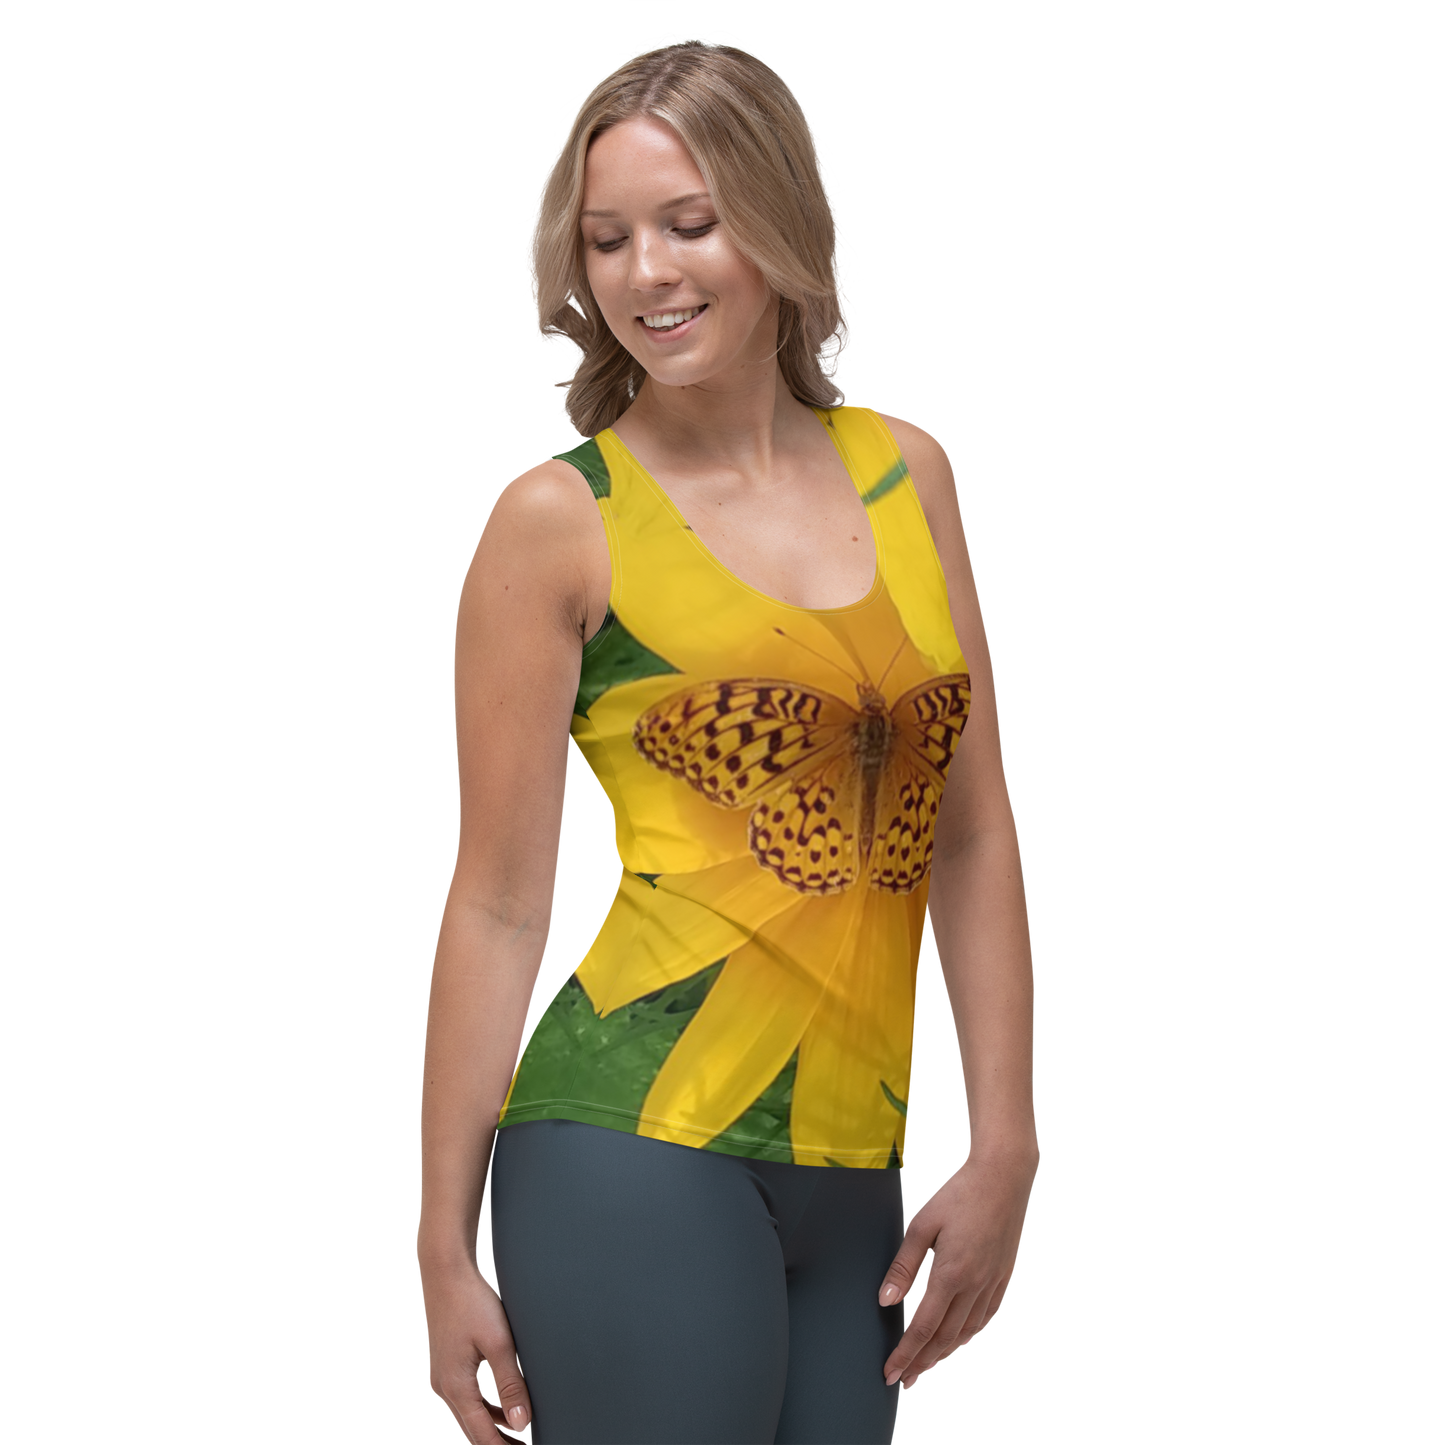 The FLOWER LOVE Collection - "Butterfly Beauty" Design Tank Top